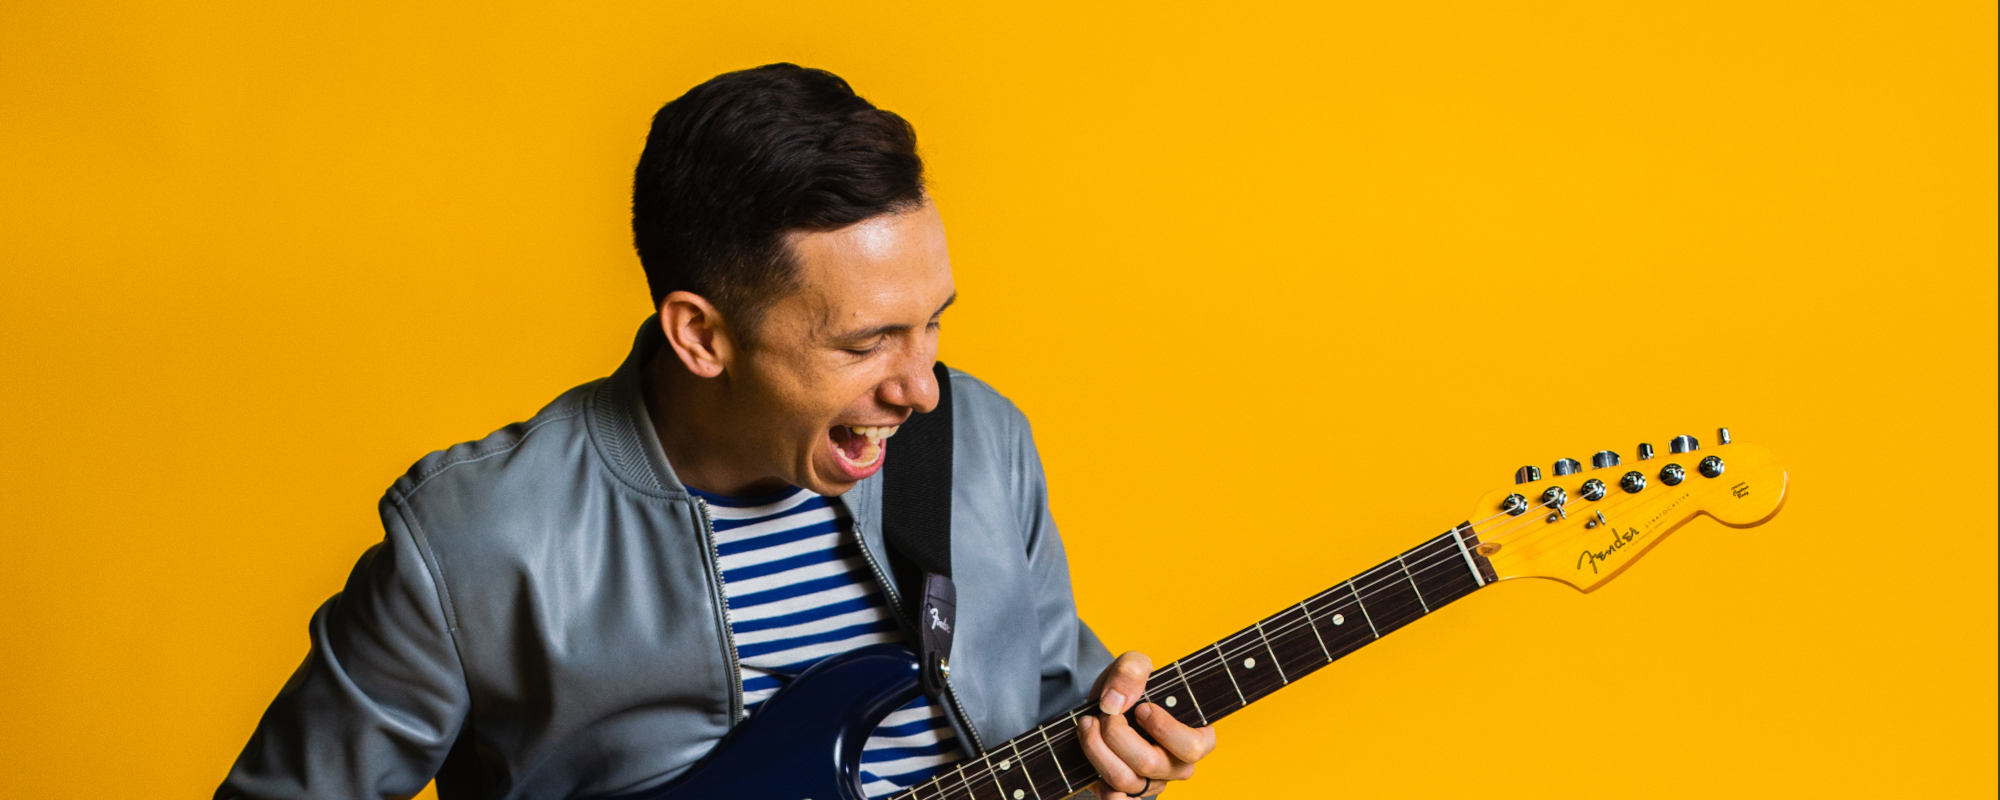 Gear Review: Cory Wong Signature Fender Stratocaster Guitar